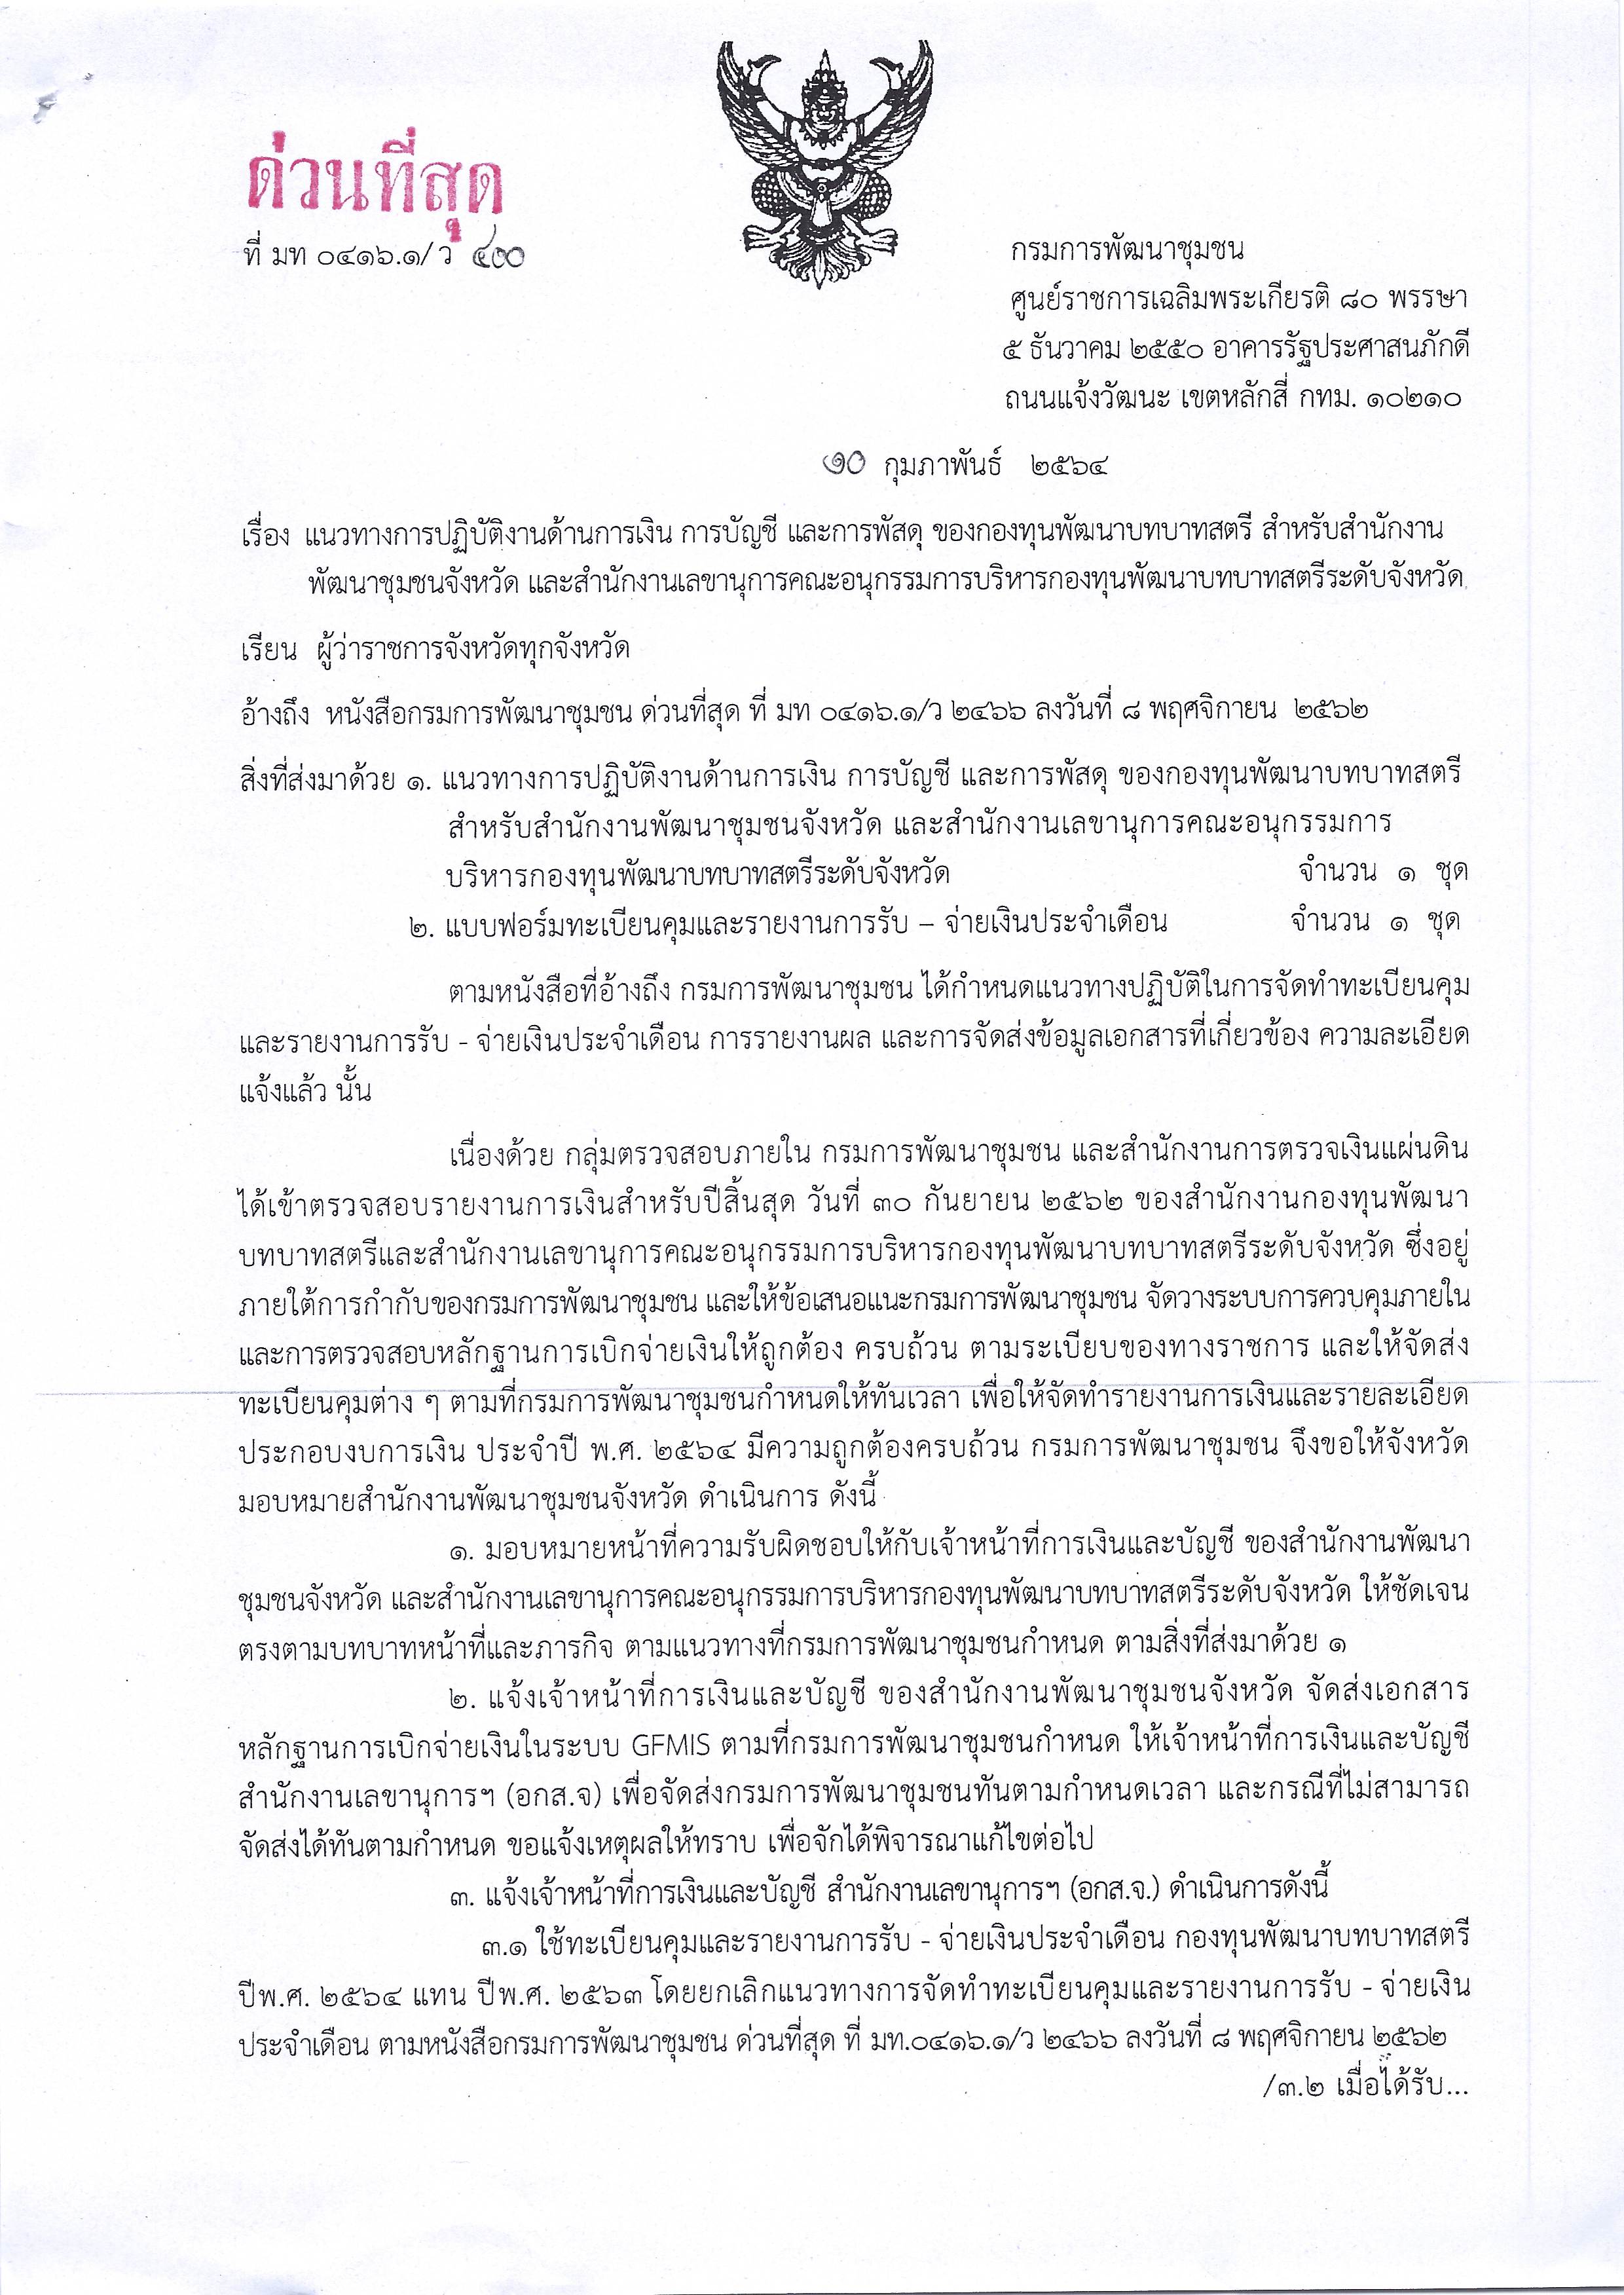 font Page 1